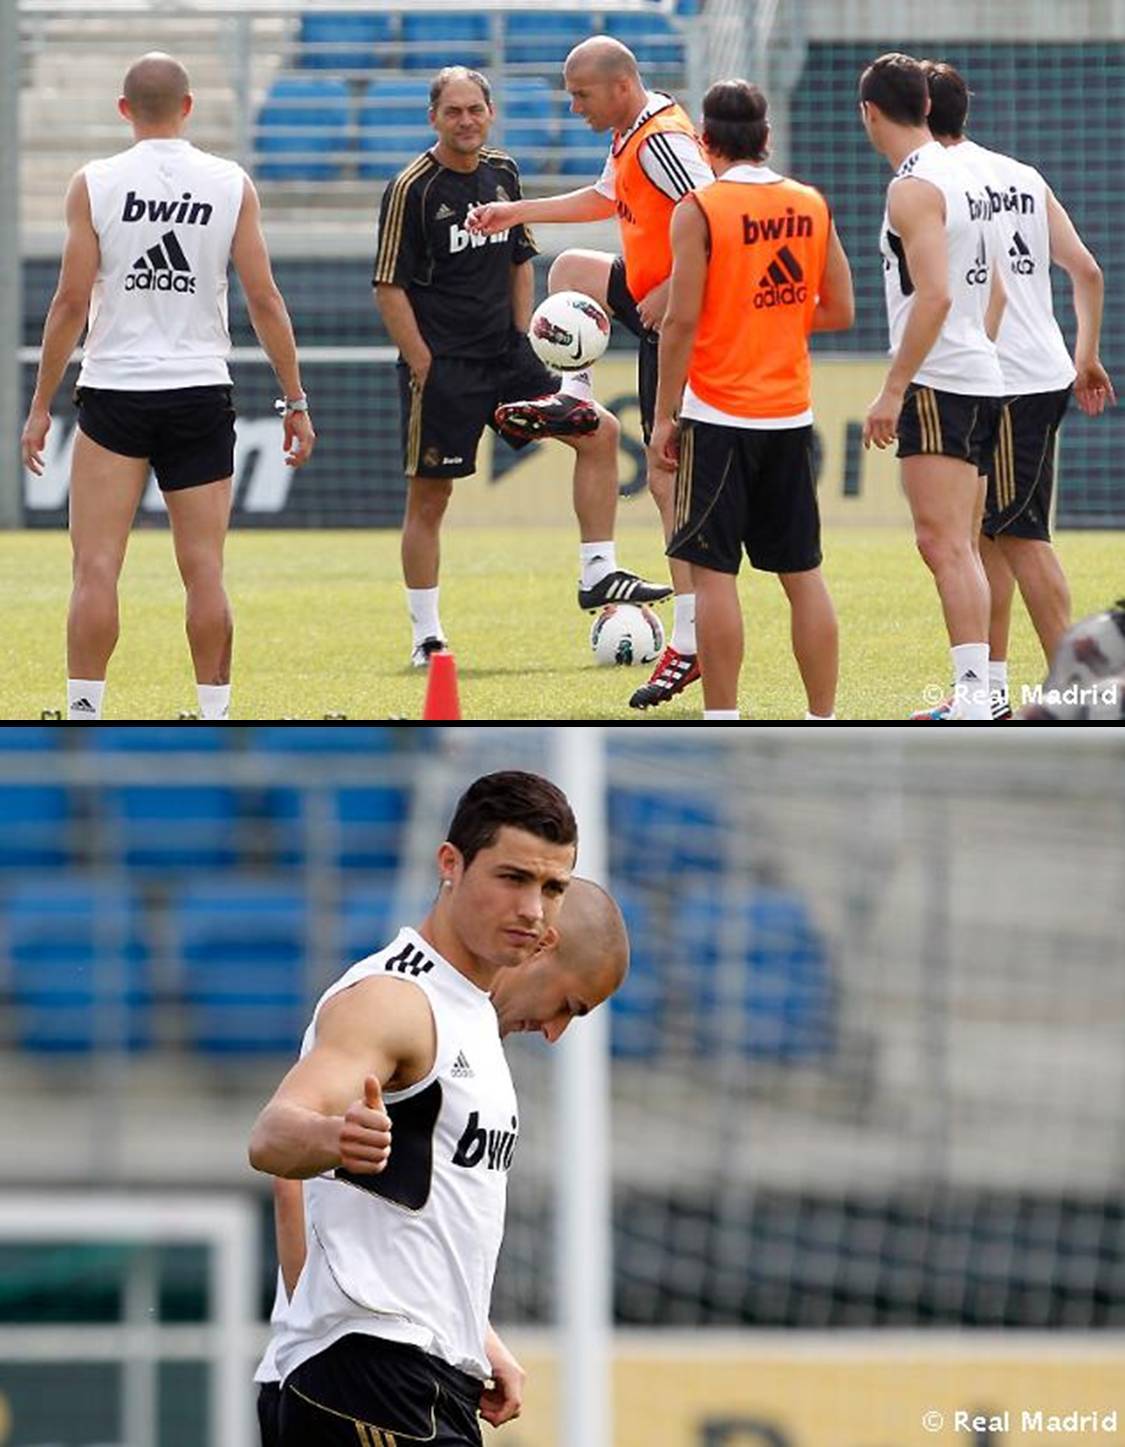 CrisKa and friends admiring Zizou&#8217;s skills.Yes, the legend had fun participating in the training today (12.05.2012).
My other tumblr: Eclectic Interests and Beautiful Sports